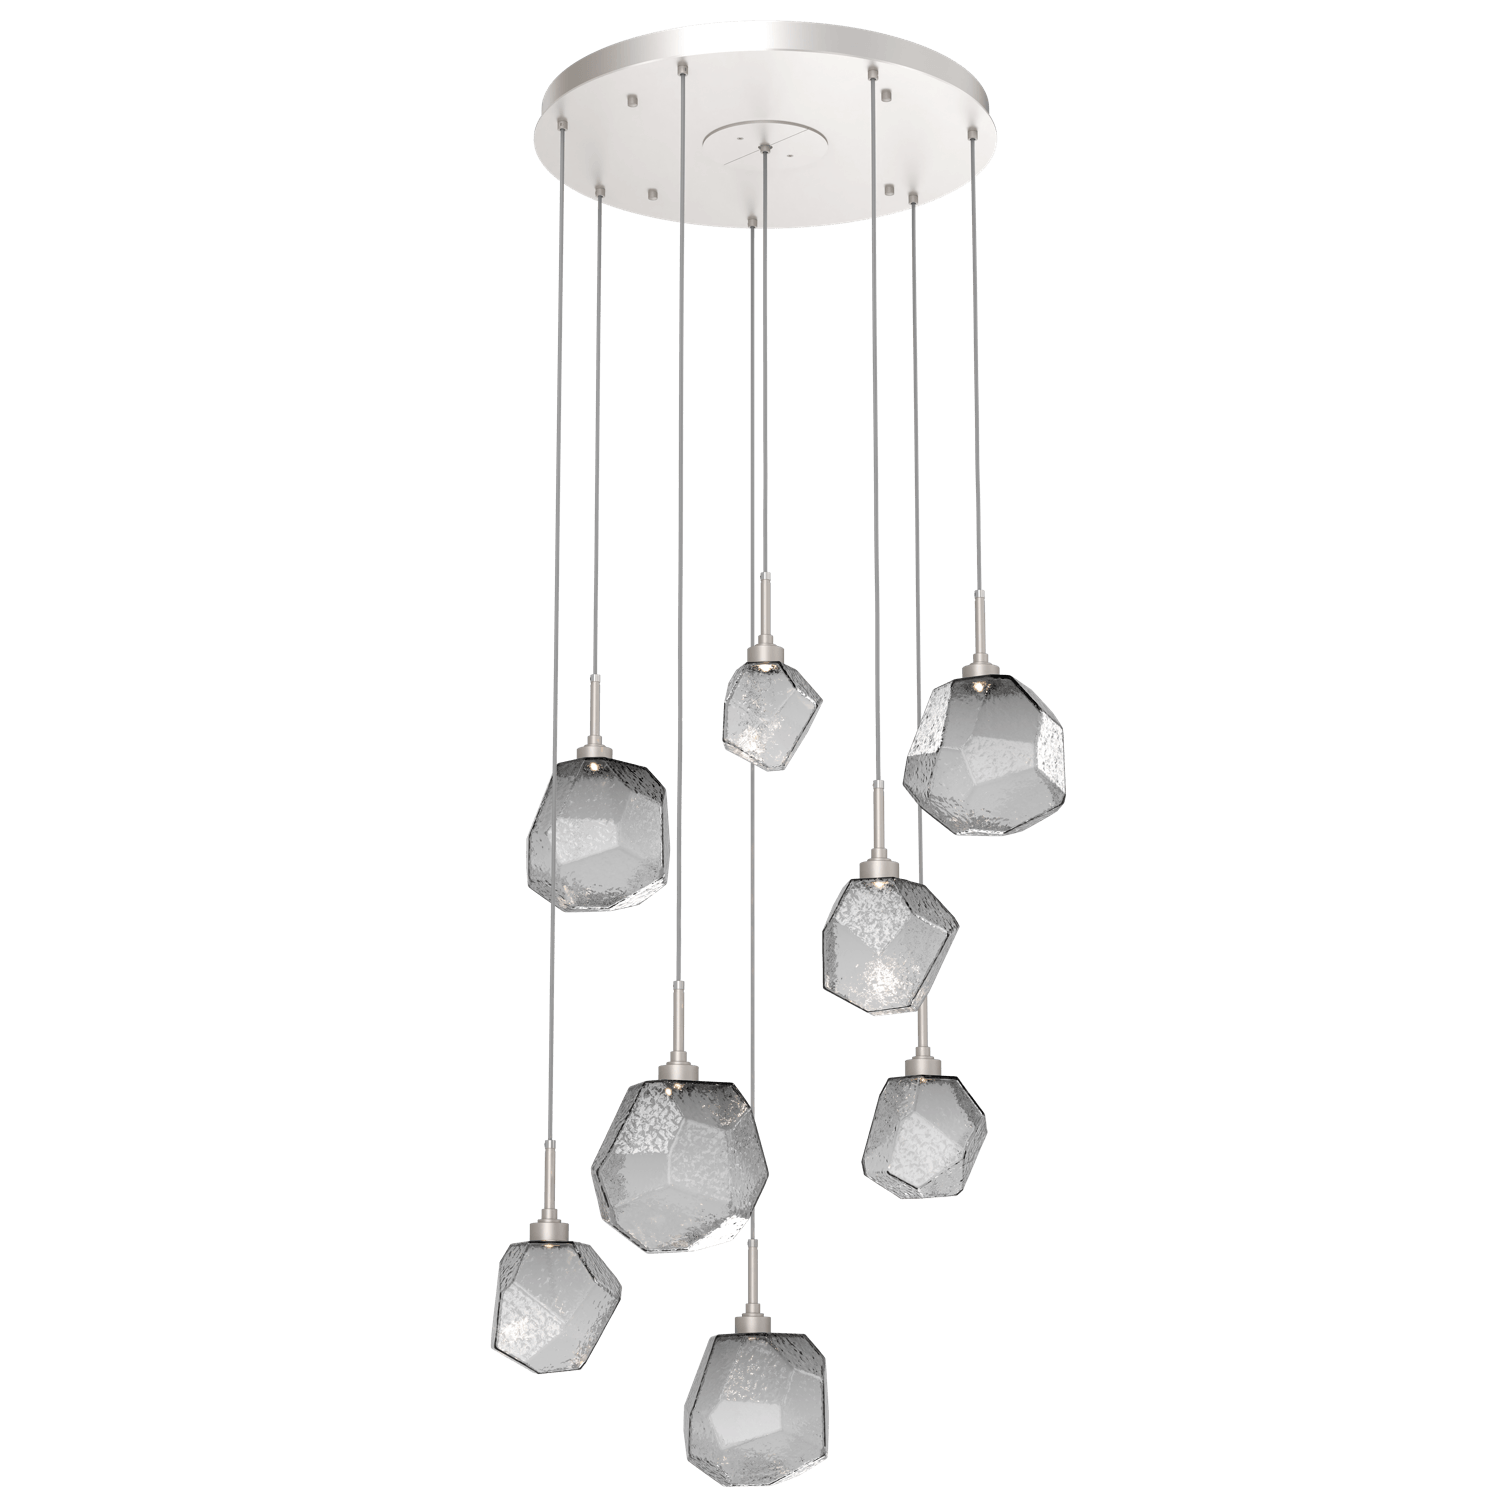 CHB0039-08-BS-S-Hammerton-Studio-Gem-8-light-round-pendant-chandelier-with-metallic-beige-silver-finish-and-smoke-blown-glass-shades-and-LED-lamping